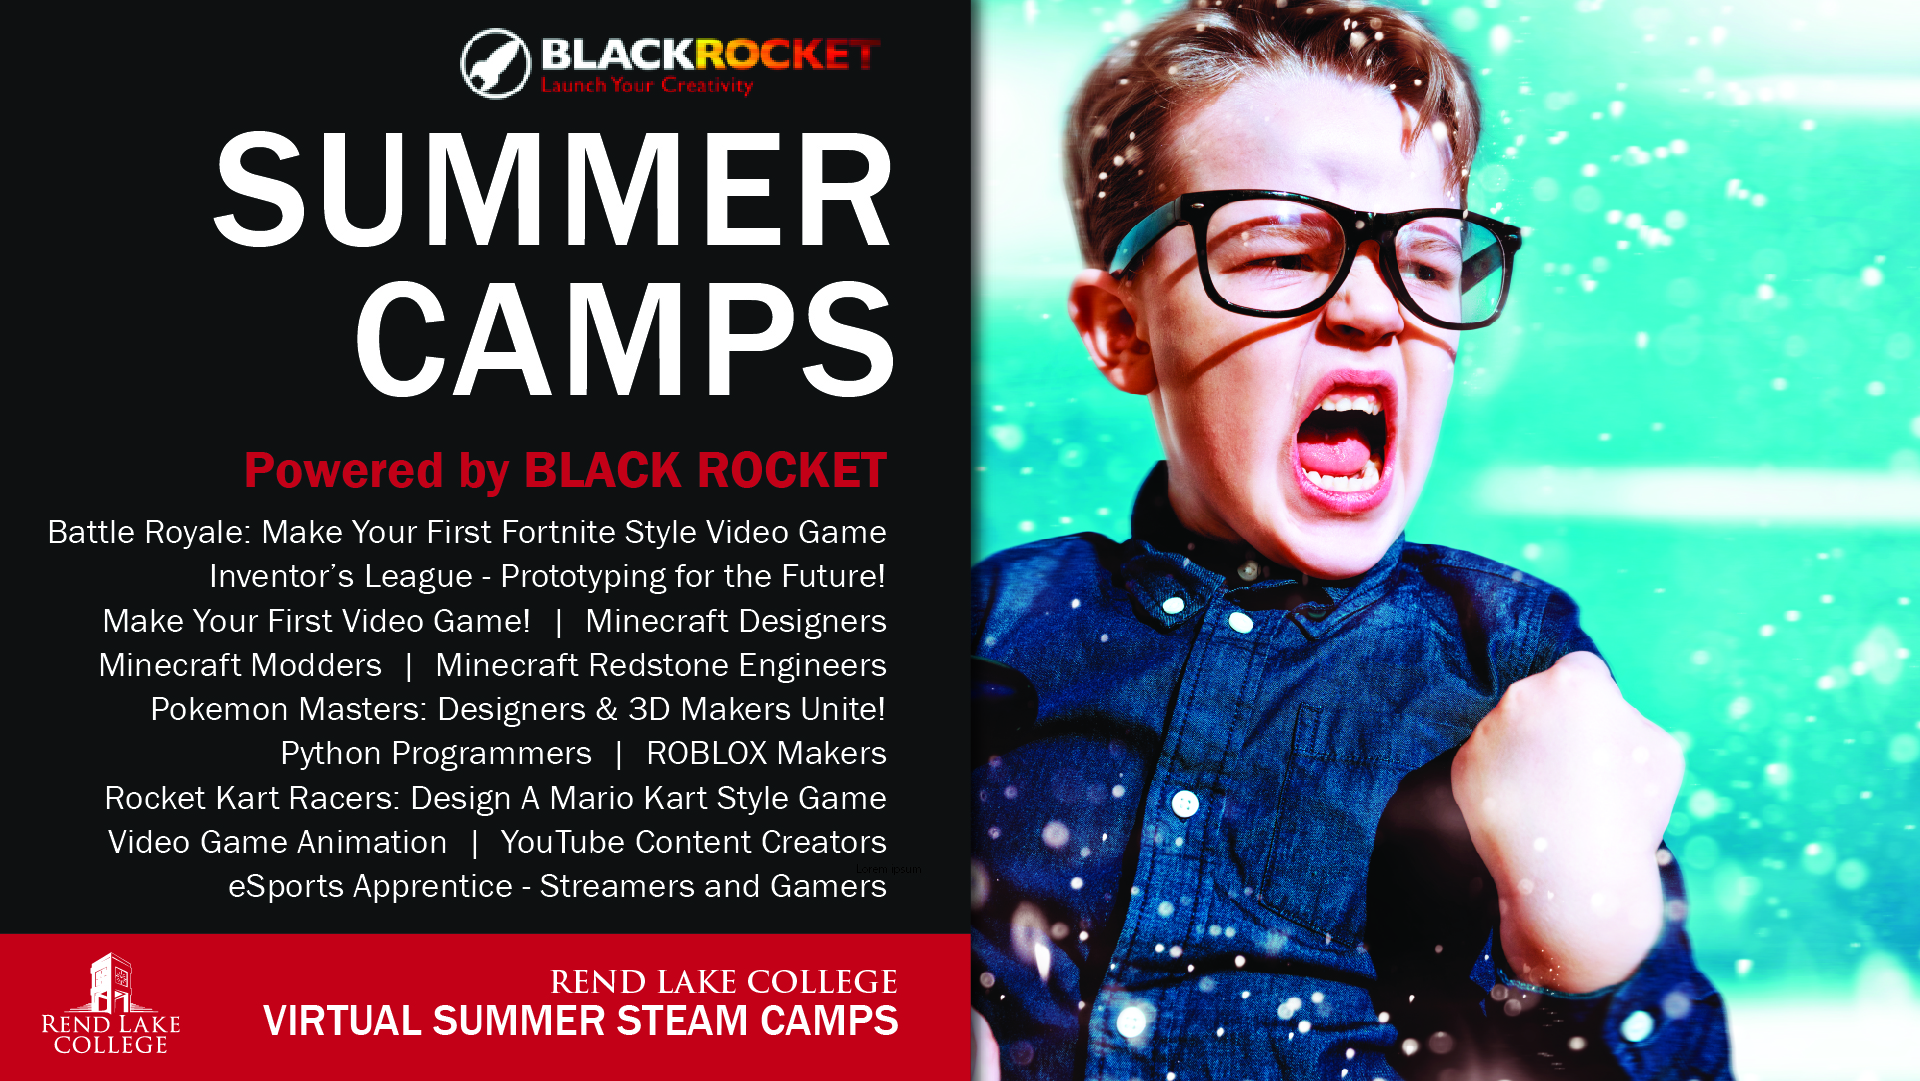 Sign Up For Virtual Kids Camps At Rlc Rend Lake College - kids youtube roblox pokemon